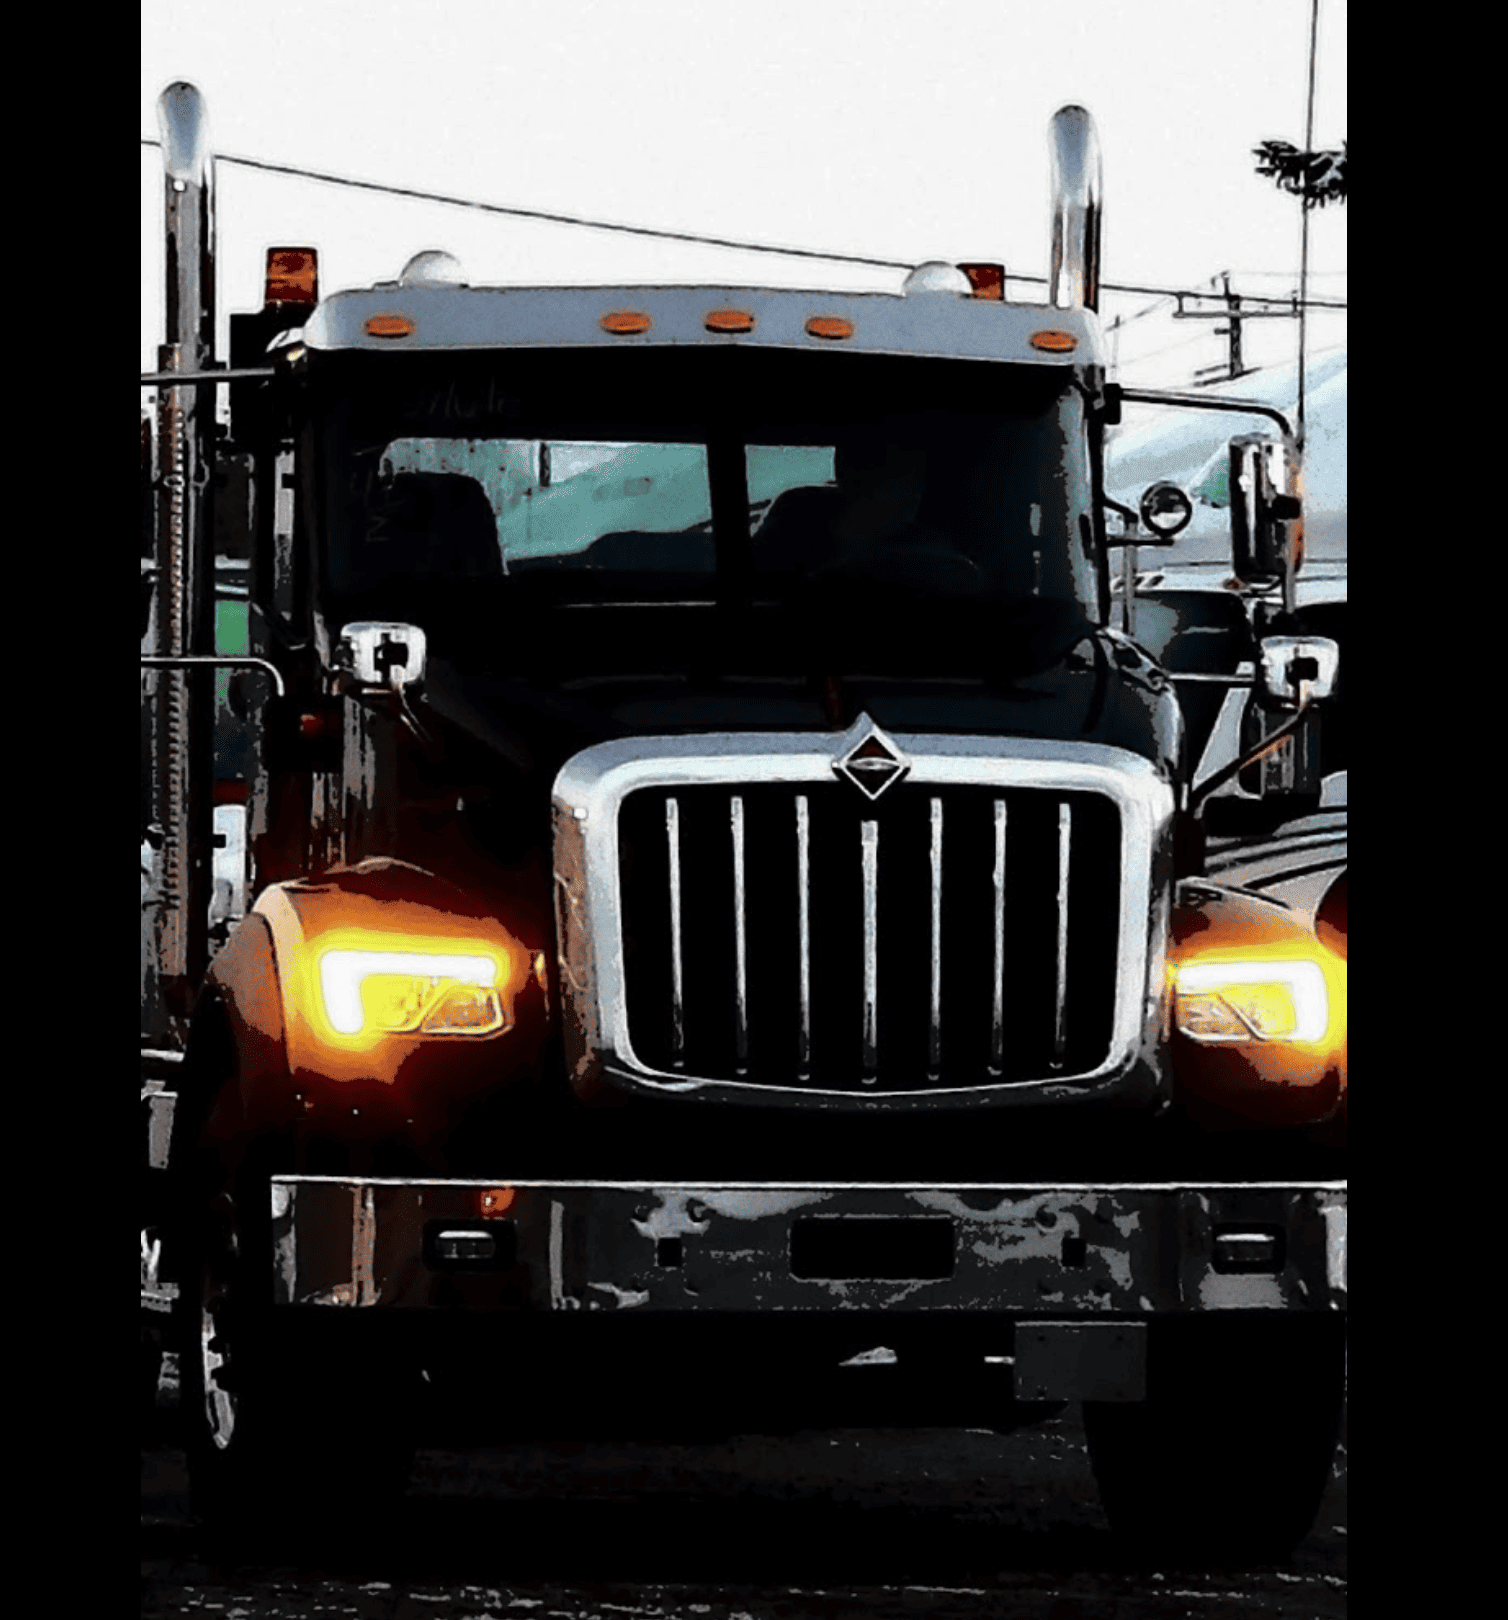 Driving Success in Ontario: International Trucks and Their Dealerships